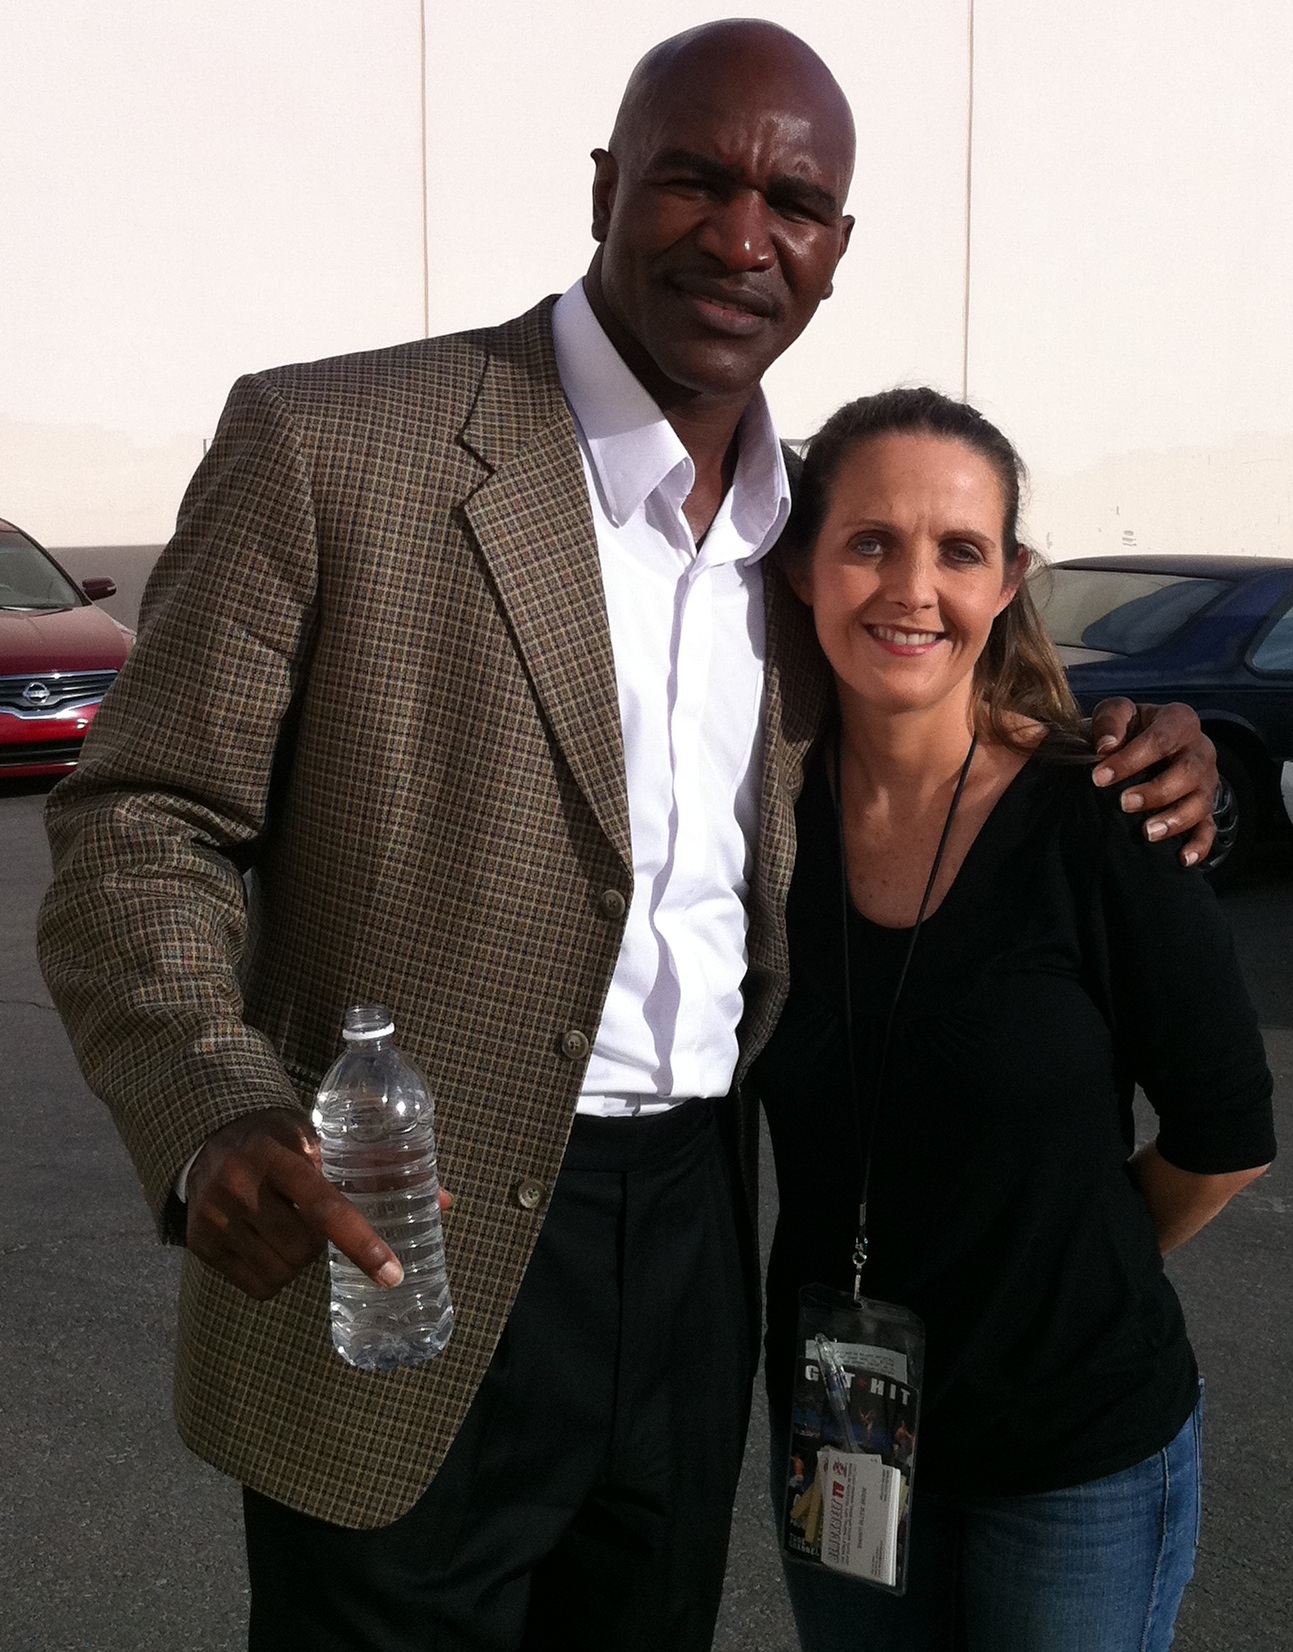 After booking, producing, shooting the show...Me and the boxing champ-Evander Holyfield!